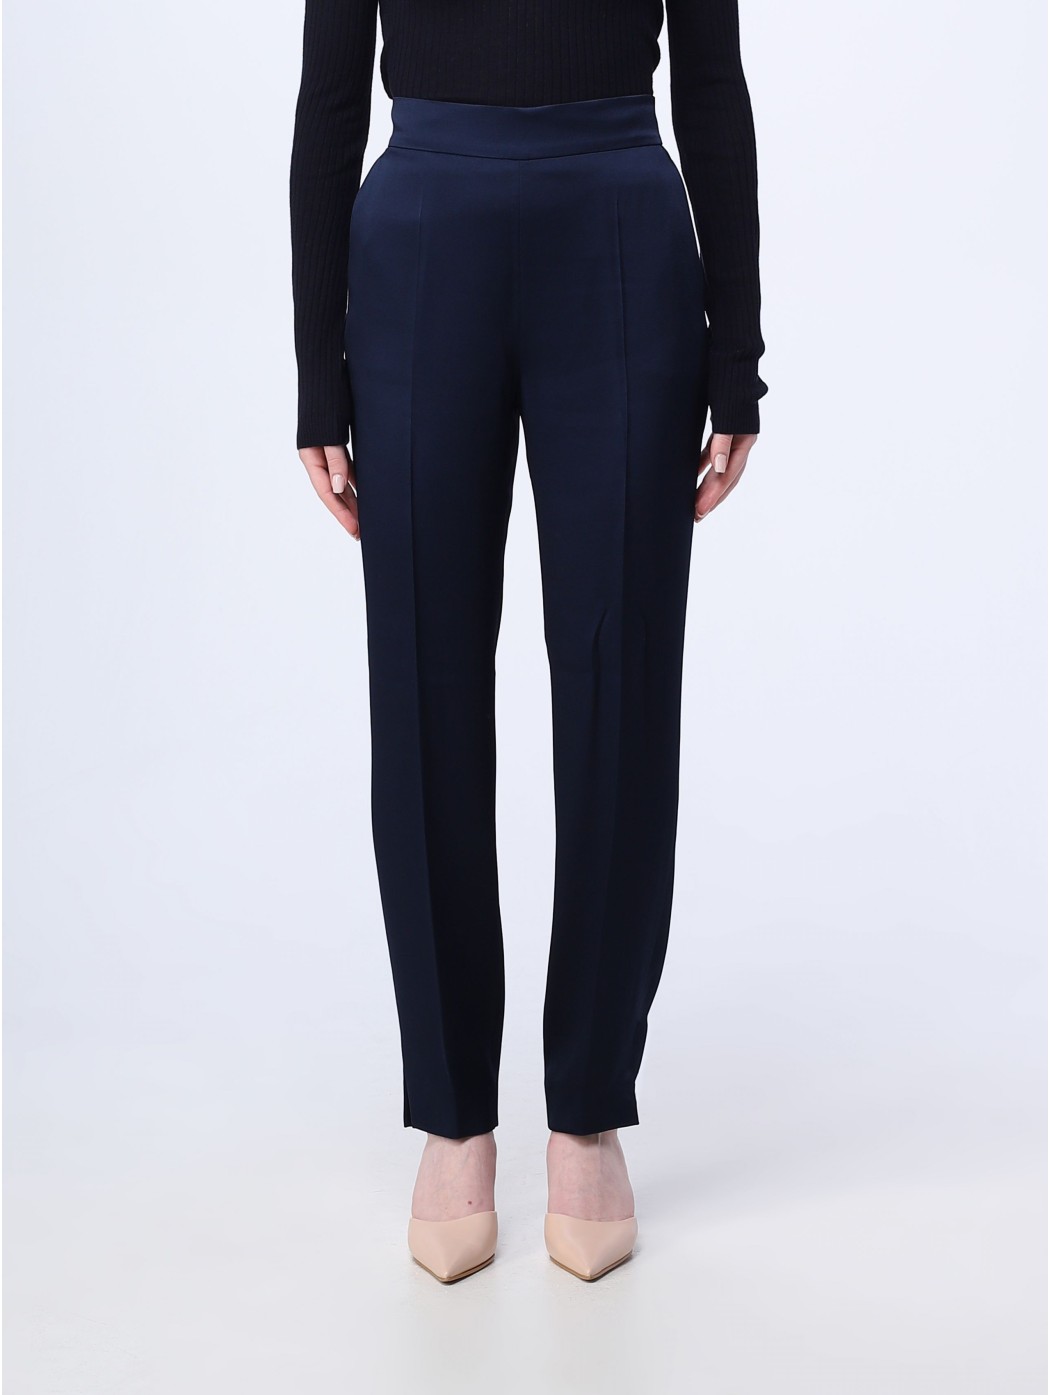 Max Mara Studio is a guarantee for modern femininity, all on our online  shop. (2)